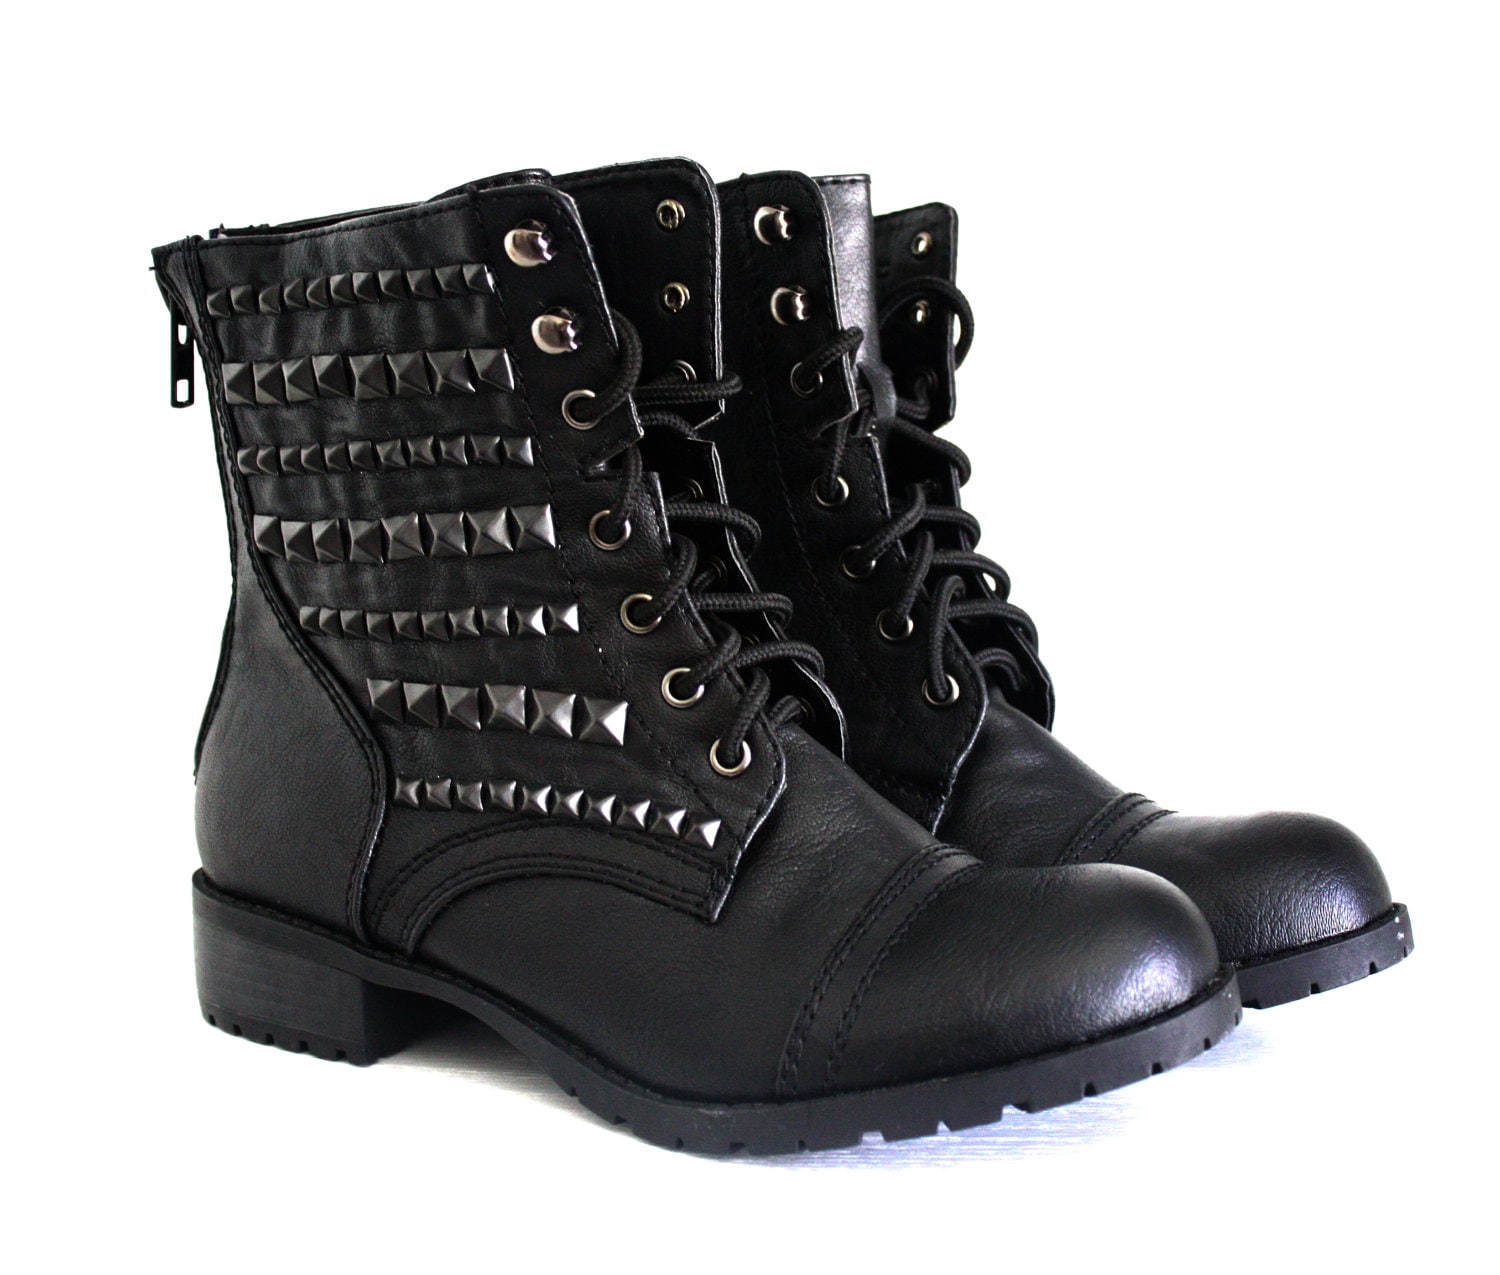 Black Combat Boots With Spikes - Yu Boots